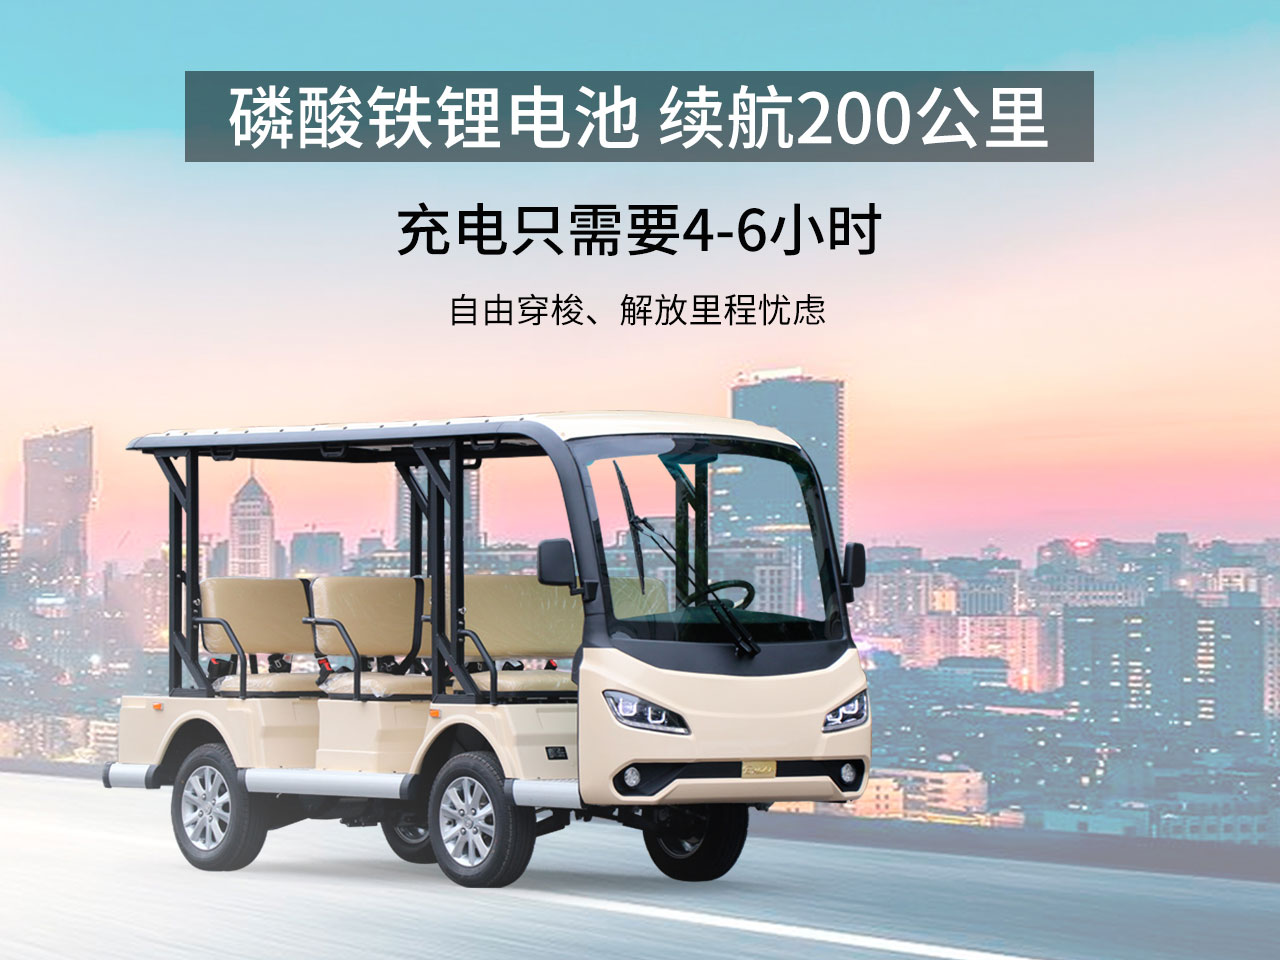 Donglang New Energy 8-seat electric sightseeing bus - Tour bus service D-G8